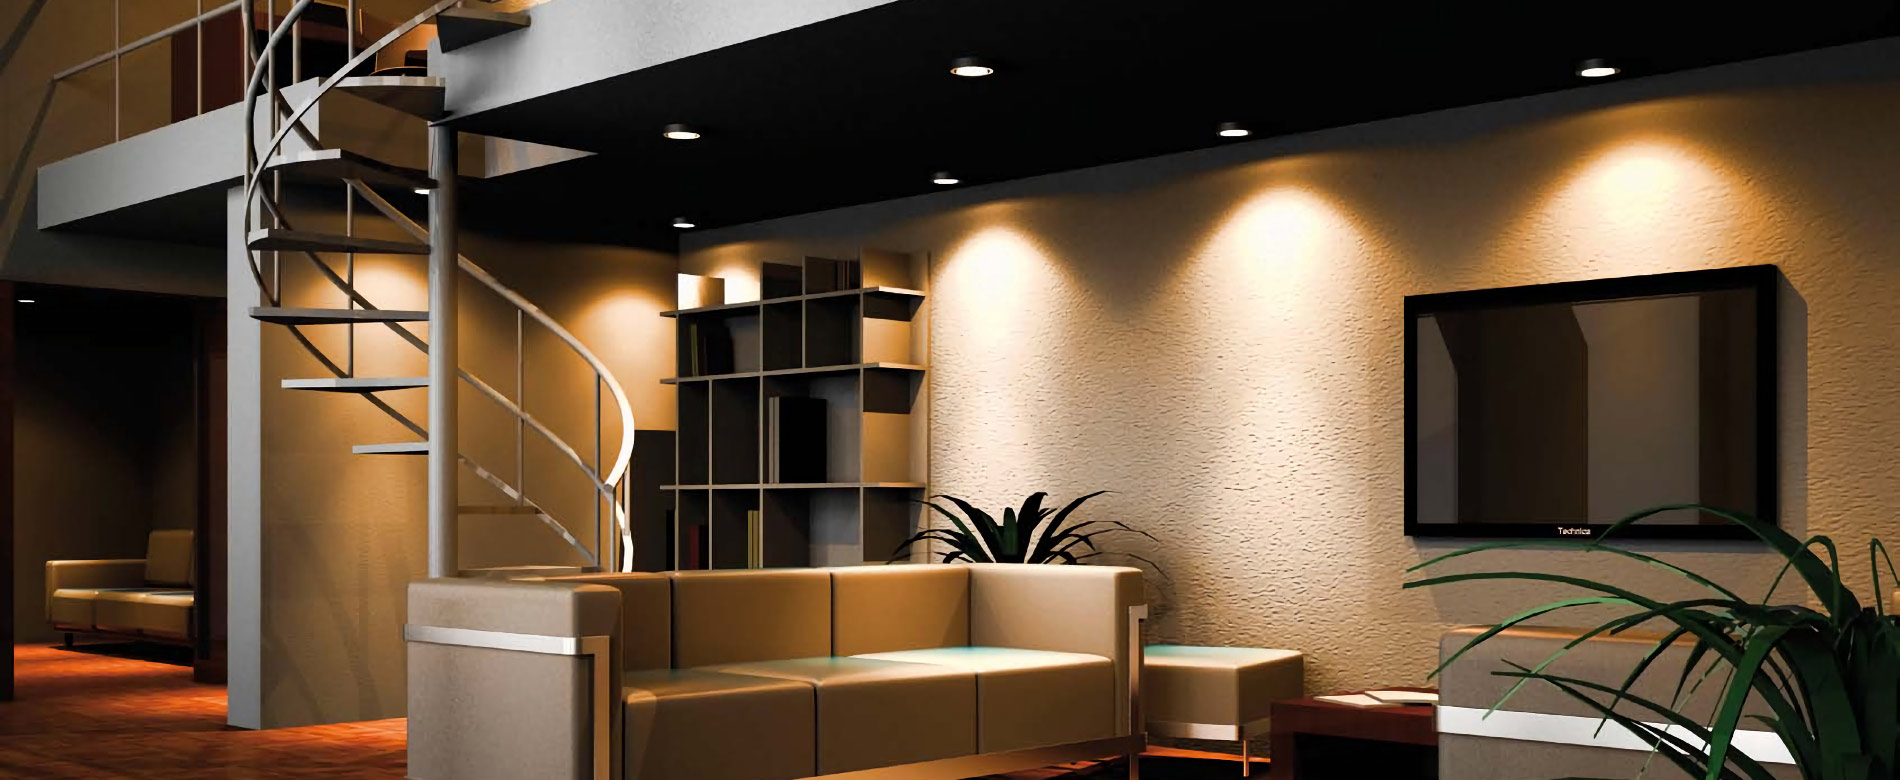 Ronaldson Electrical Construction | Lighting Contractor South Jersey